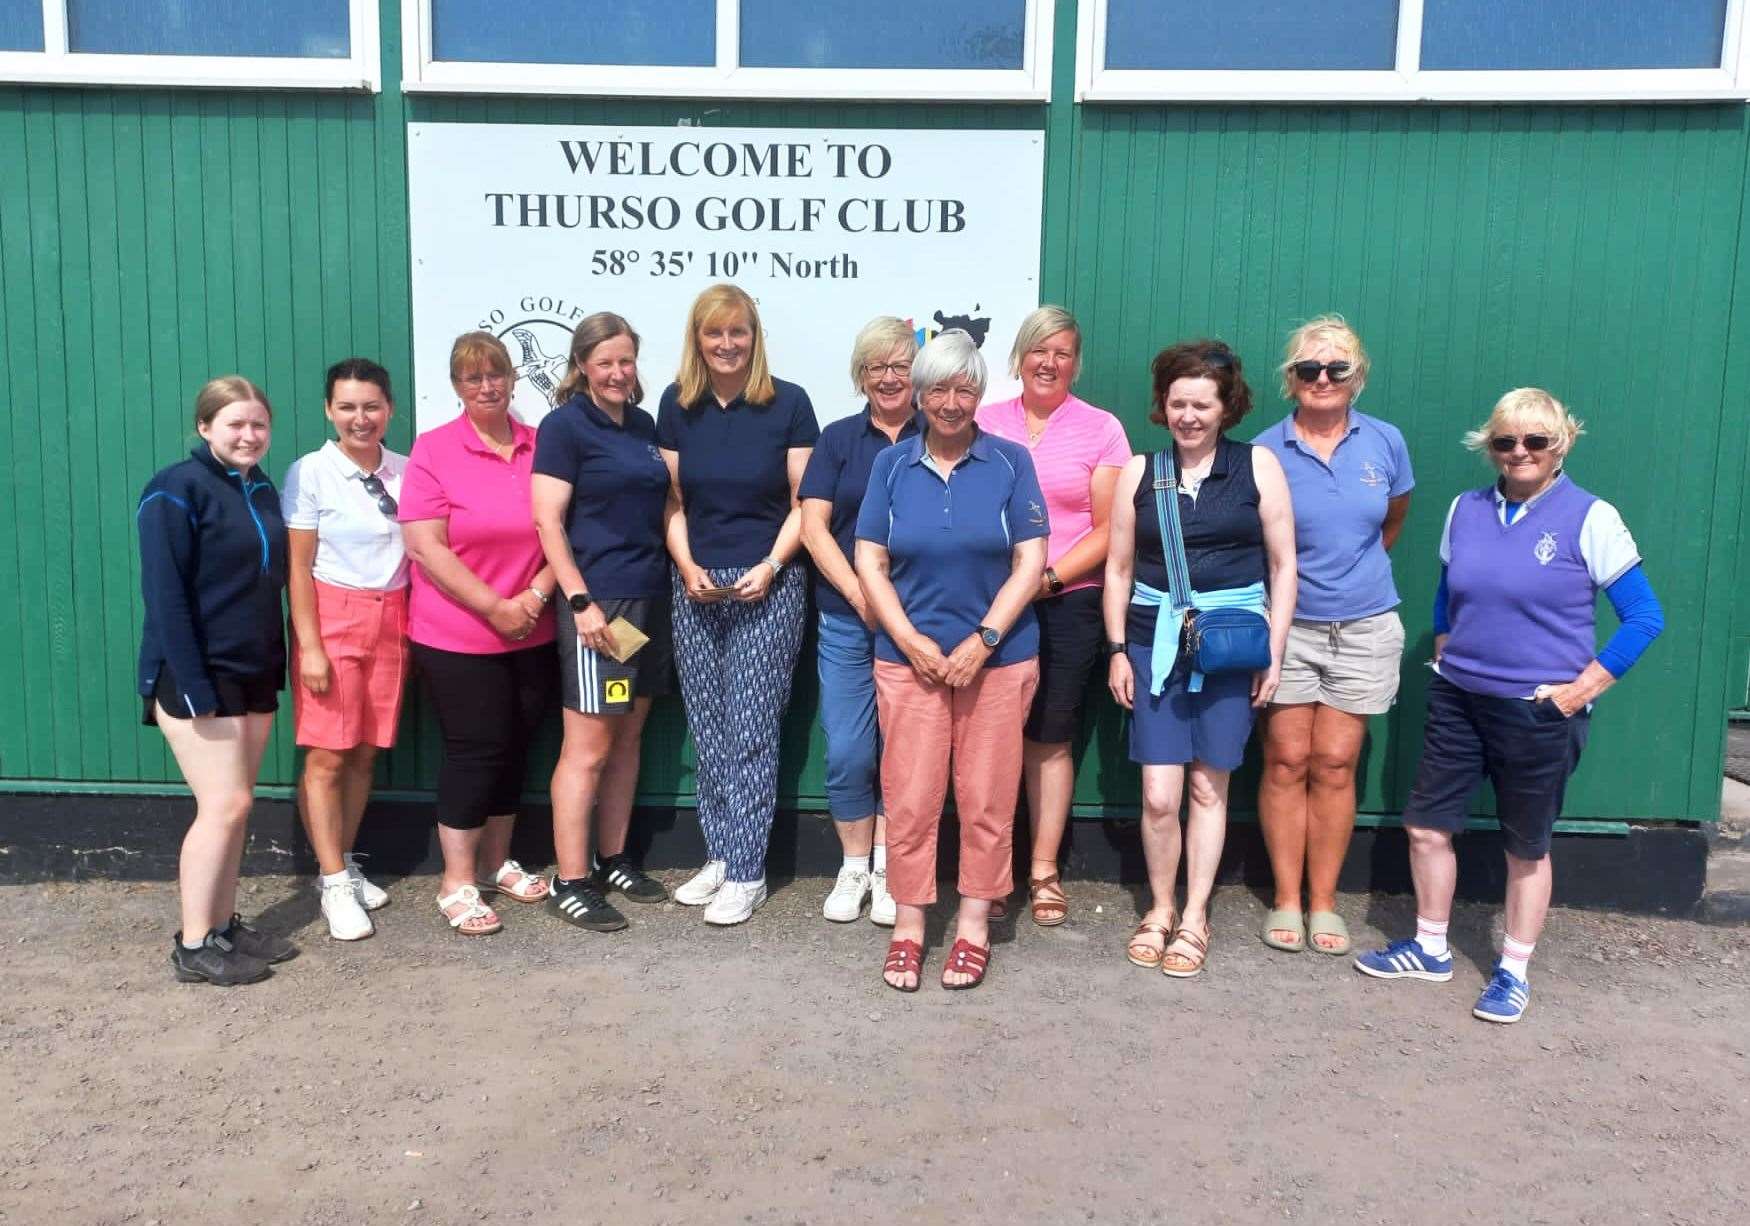 Competitors in the ladies' three-team open at Thurso Golf Club.